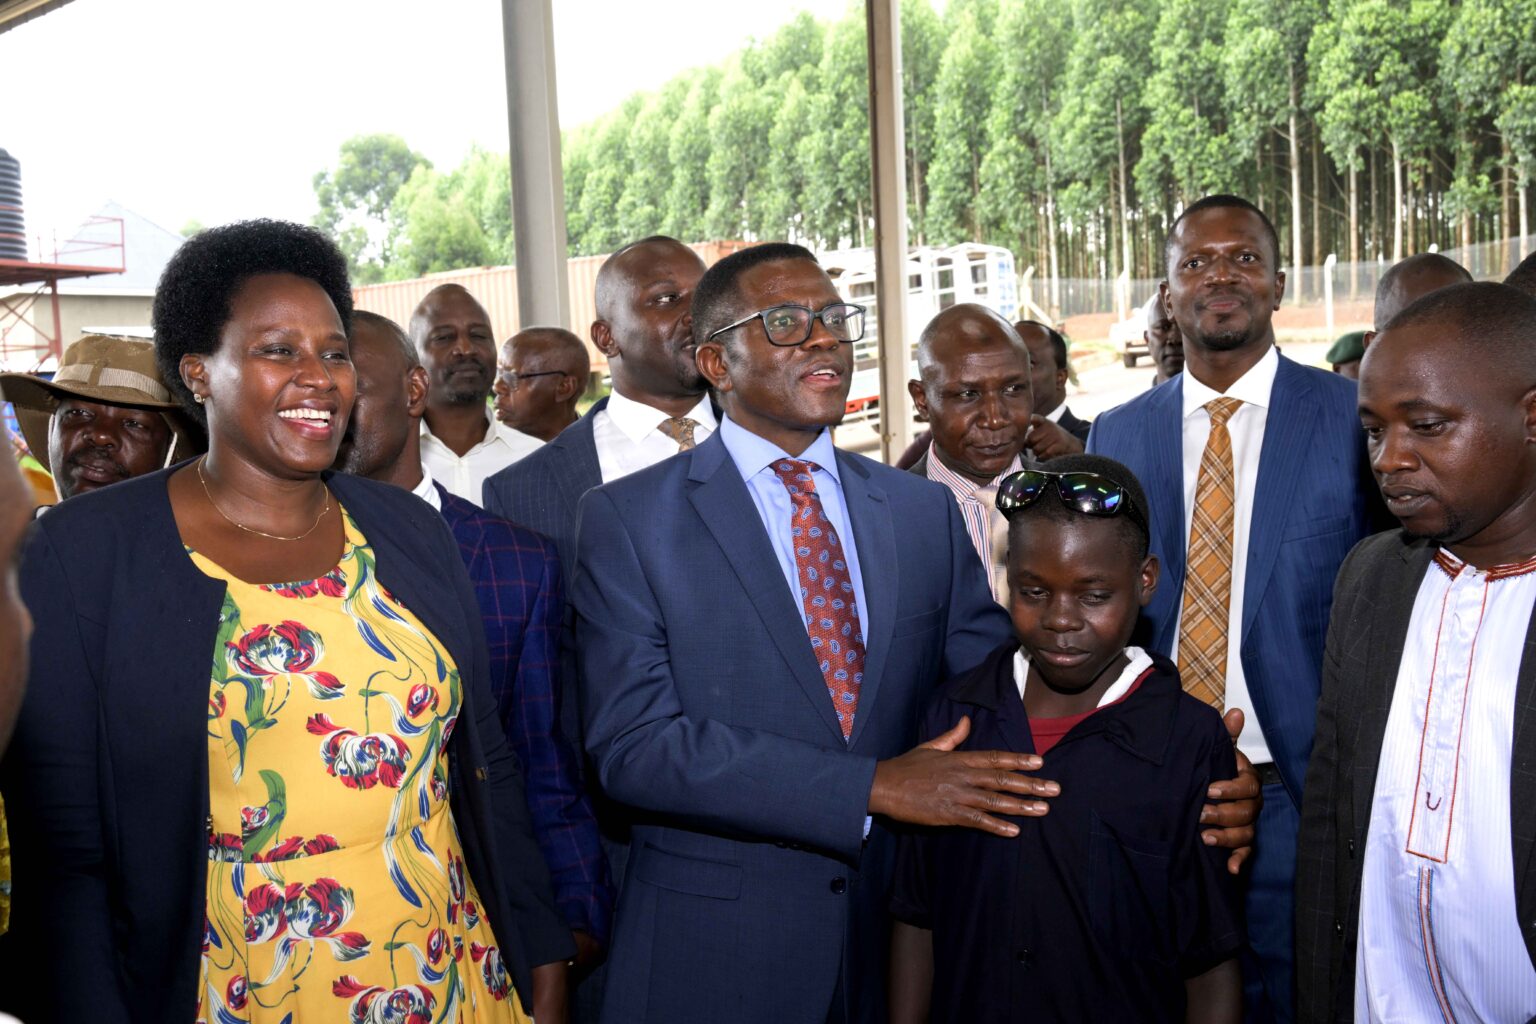 Jane Barekye, the State House Comptroller, and Charles Peter Mayiga, the Buganda Kingdom Premier, at the launch of the Zonal Skilling Industrial Hub in Masaka.